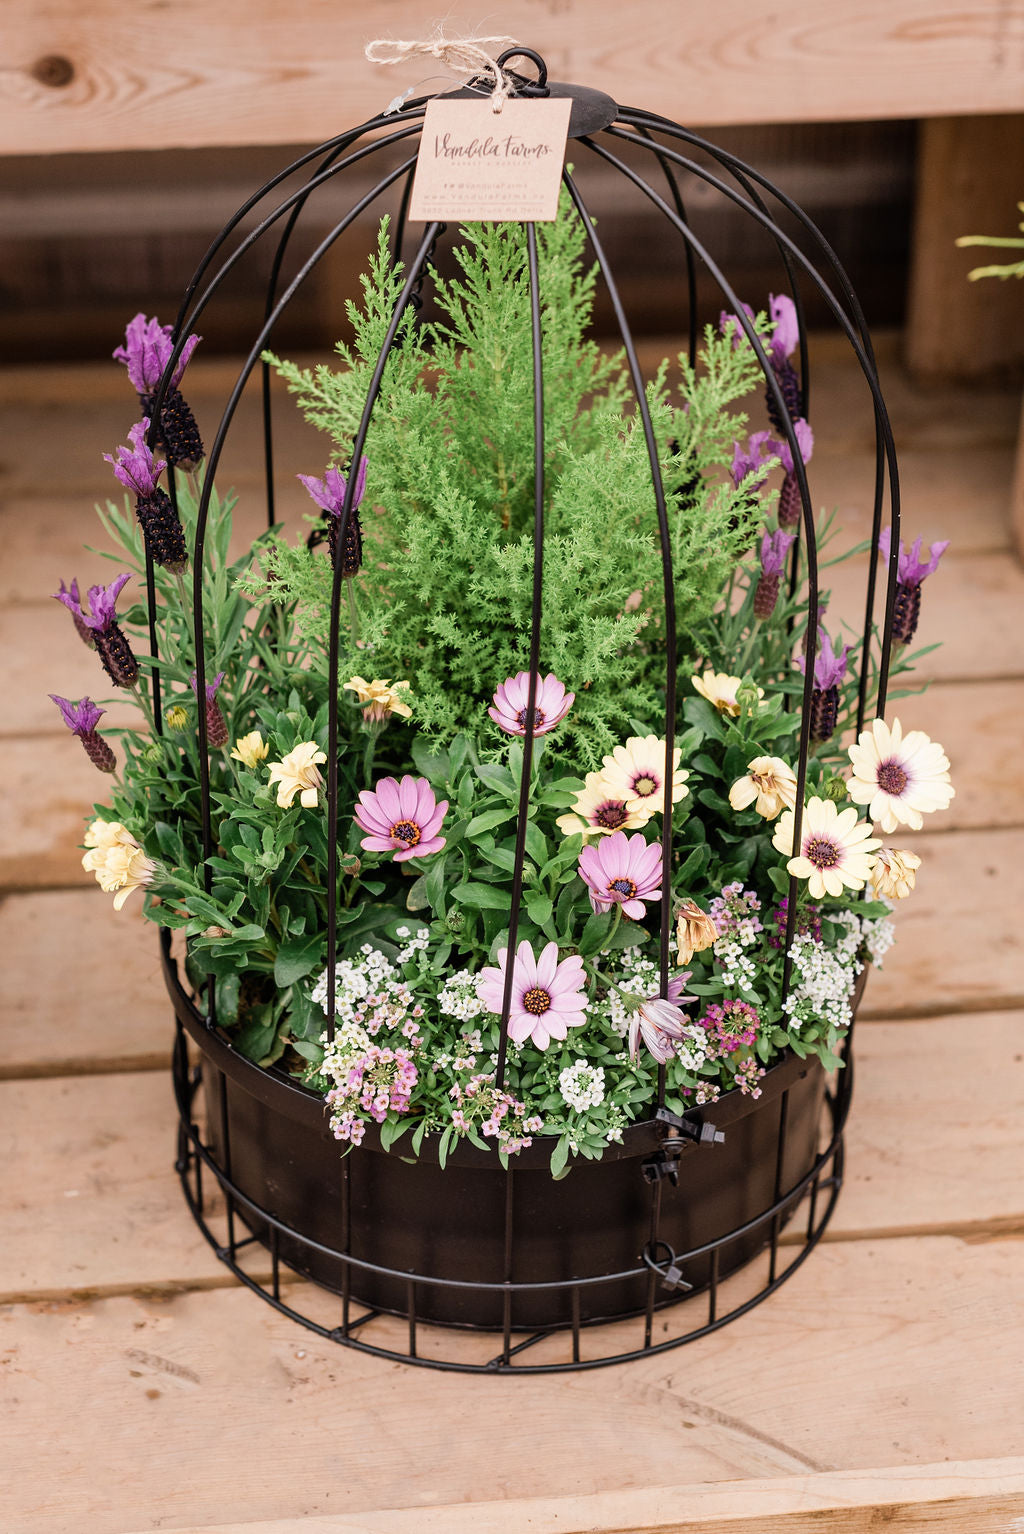 Botanical Designer - Outdoor Containers